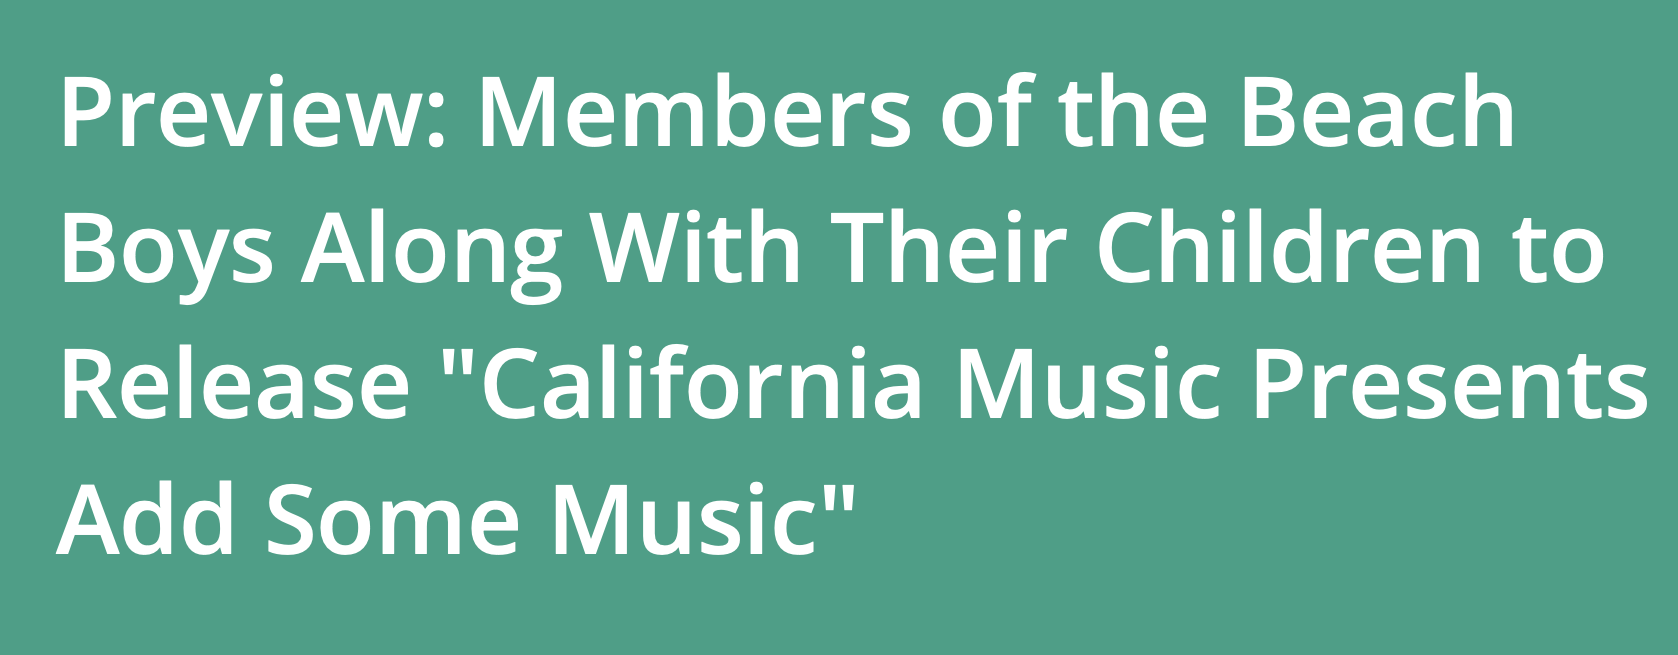 Preview: Members of the Beach Boys Along With Their Children to Release “California Music Presents Add Some Music”